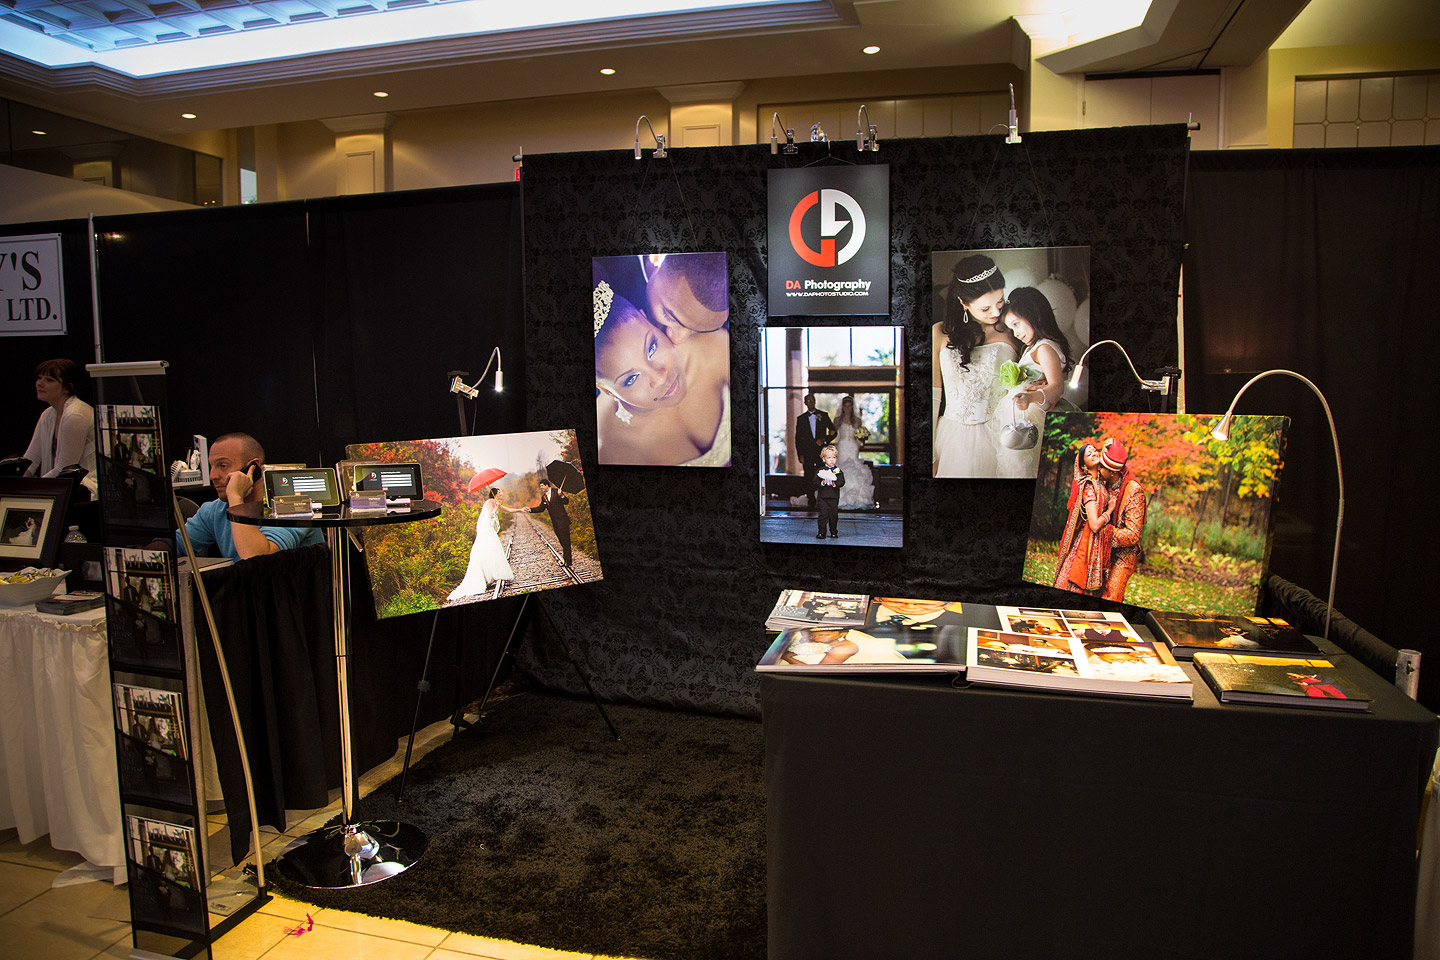 Bridal Booth Photographer Set up by DA Photography - Bridal Show